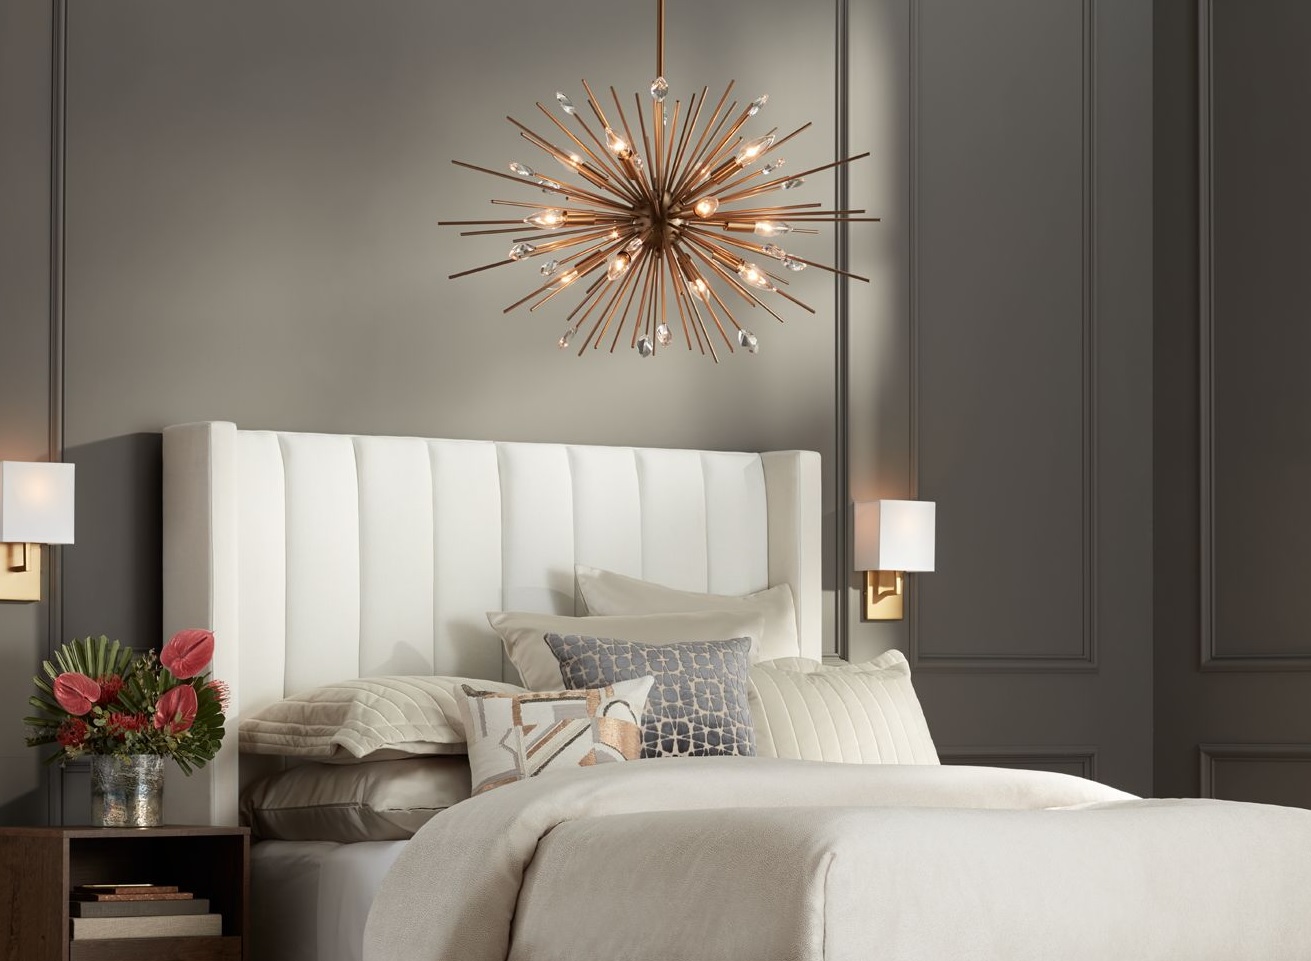 Bedroom Chandelier Ideas: 10 Ways To Use This Glamorous Lighting Style